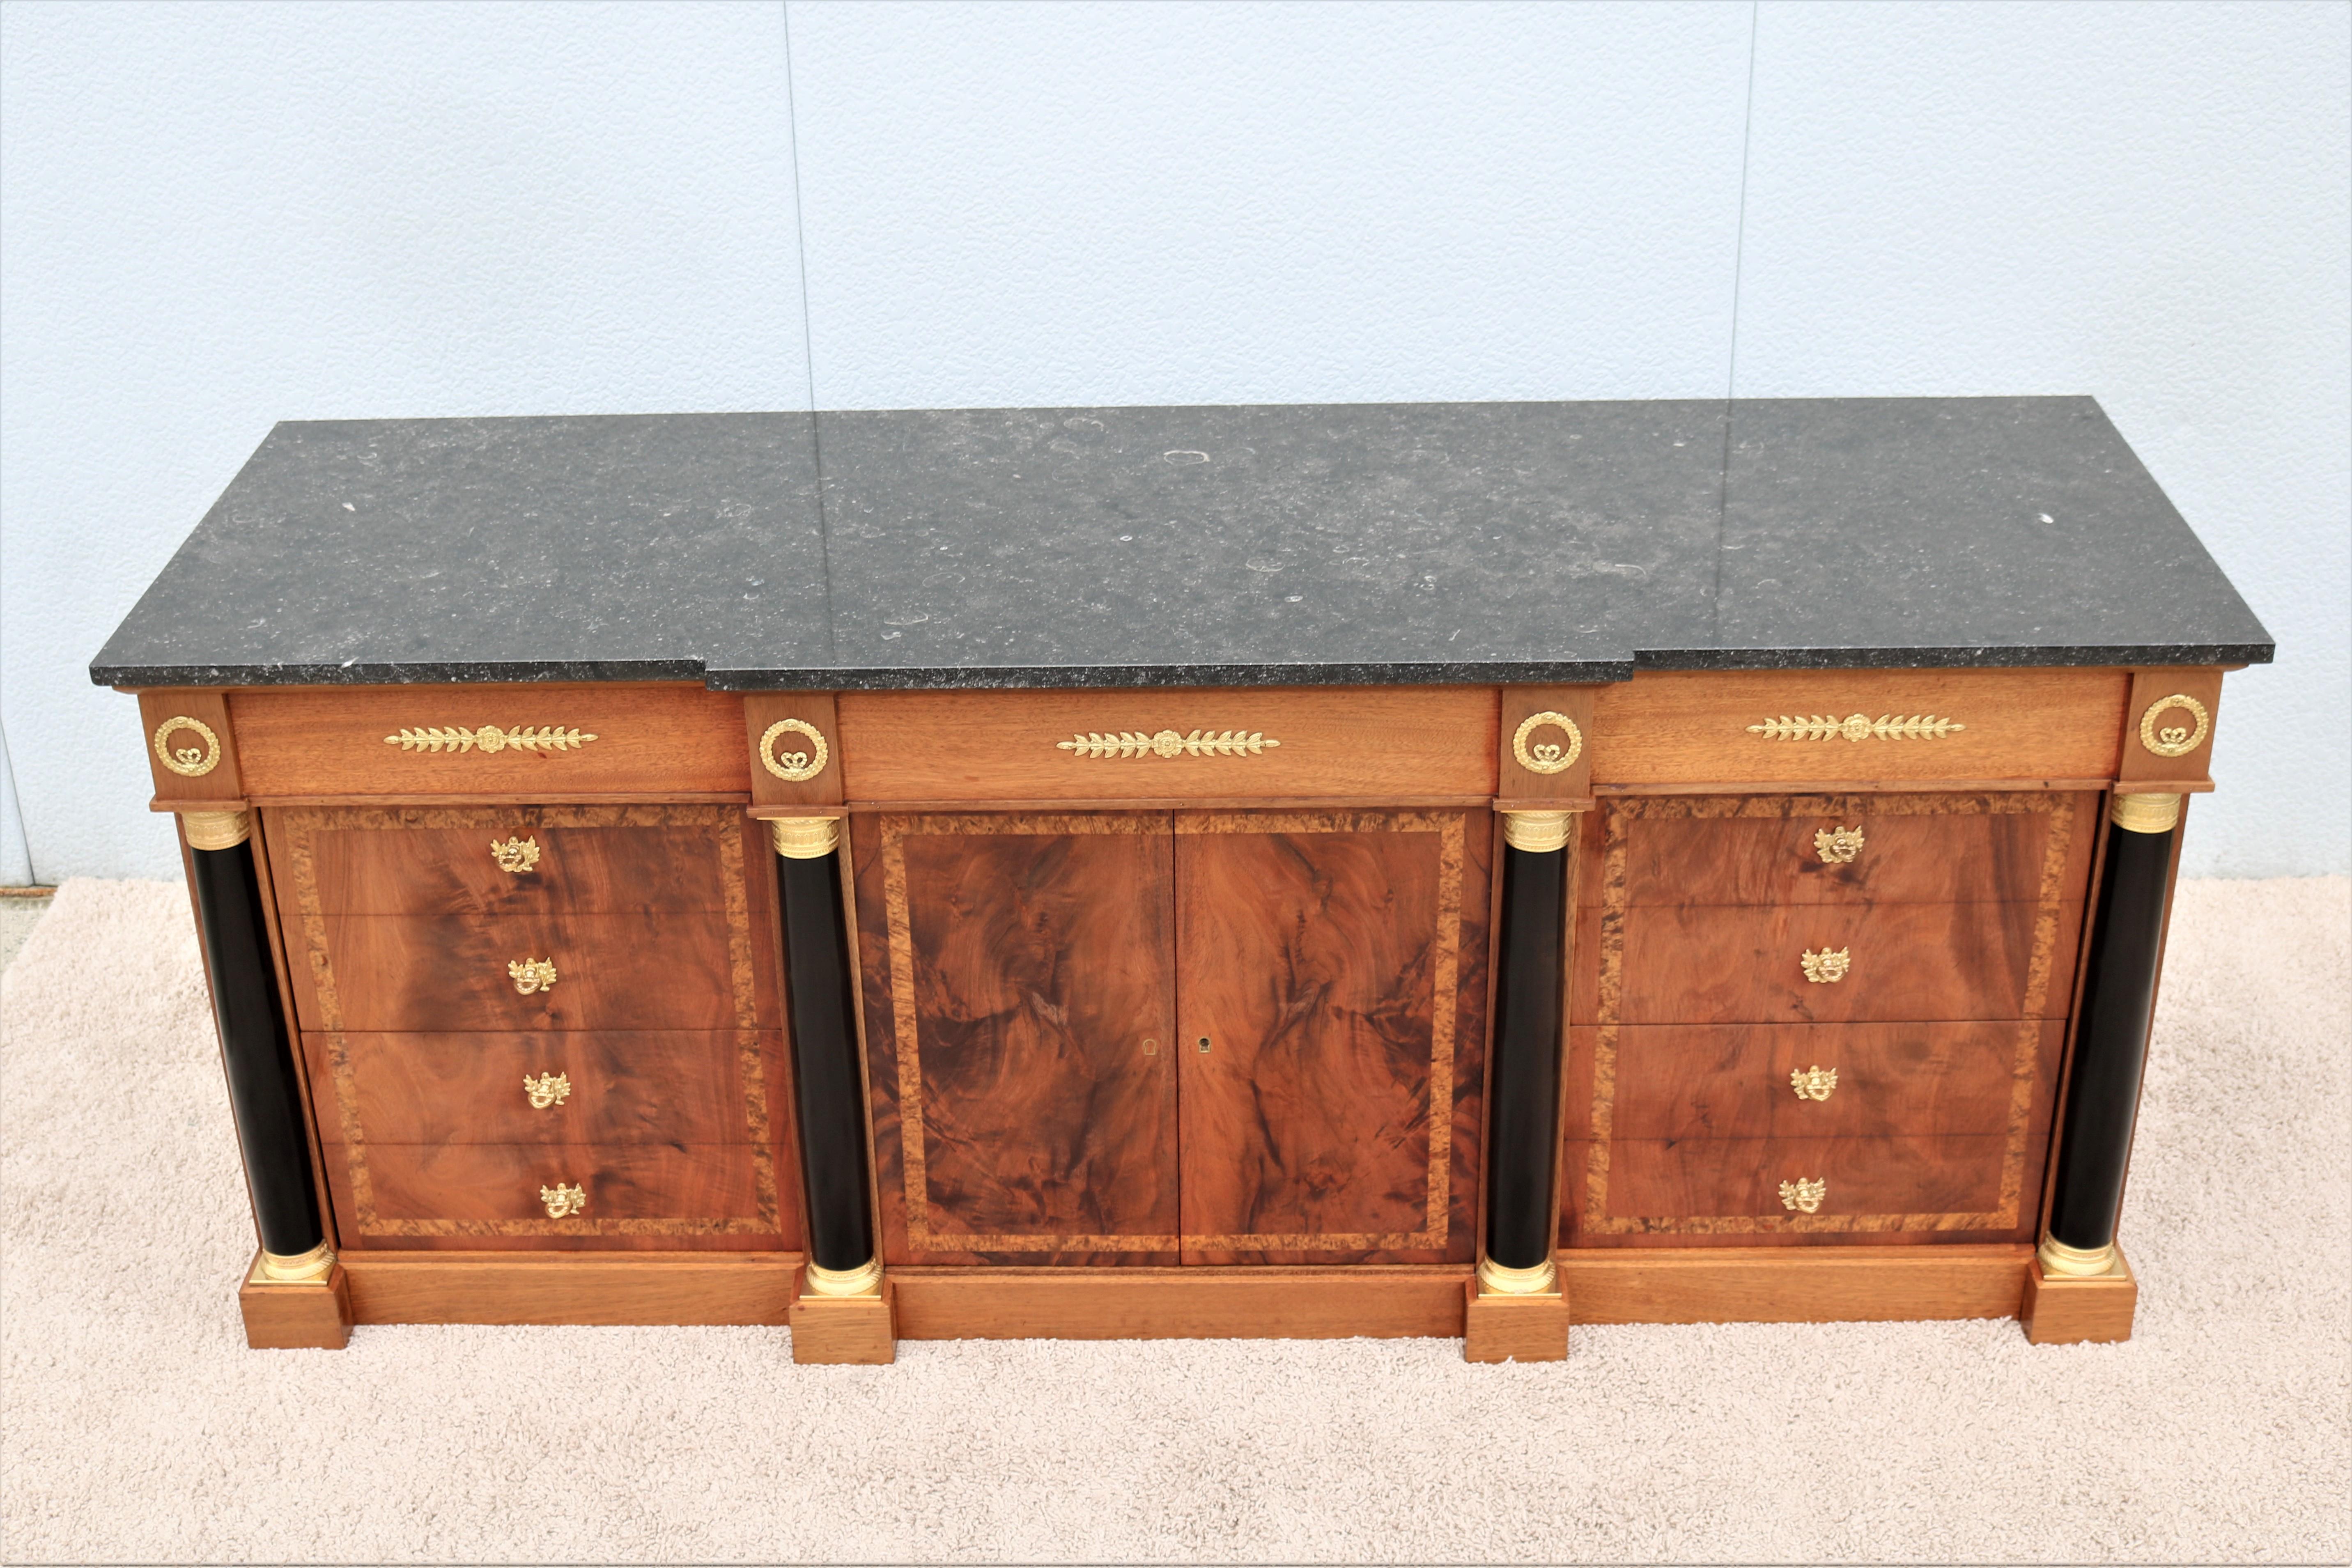 Vintage French Empire 19th century style wonderful mahogany and fabulous black seashell marble top credenza cabinet, in the manner of Georges Jacob-Desmalter.
This cabinet look striking and magnificent with rich deep mahogany decorated with